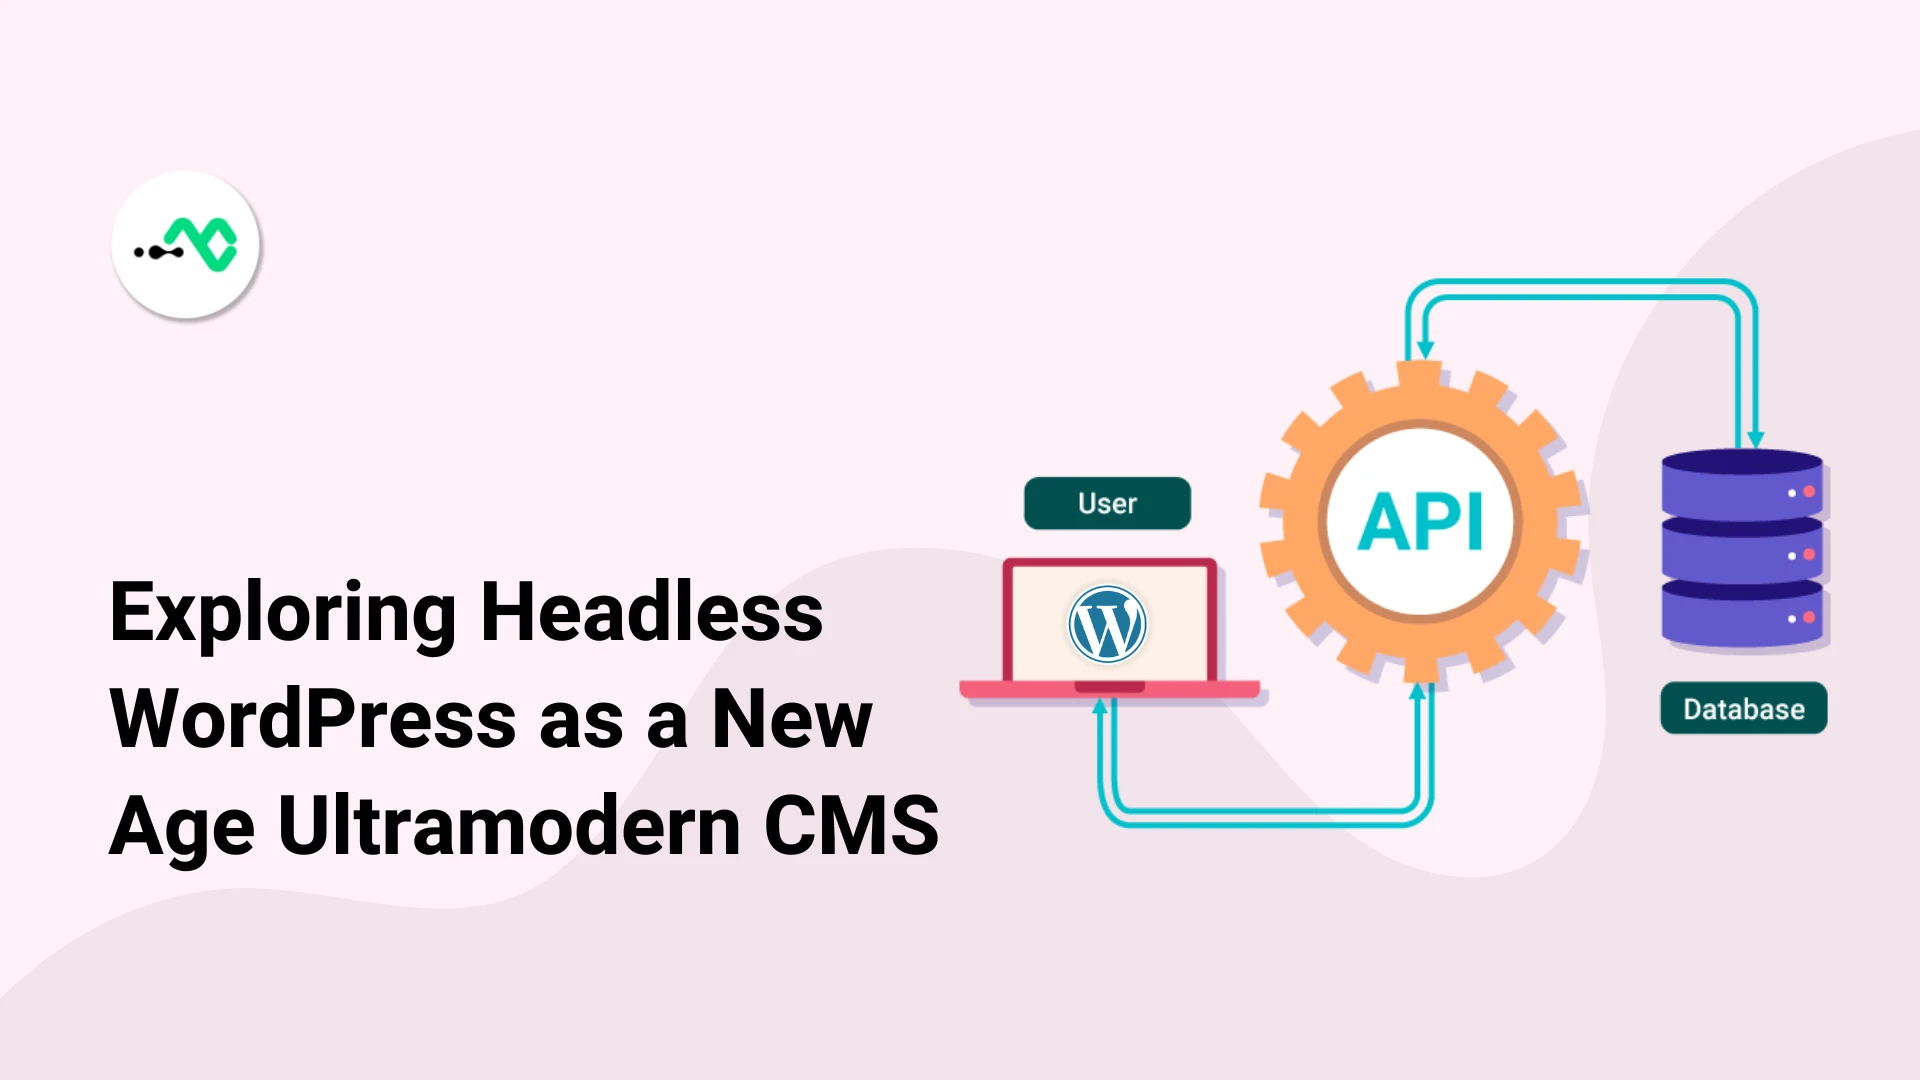 Why Choose WordPress as Headless CMS for Your Next Project